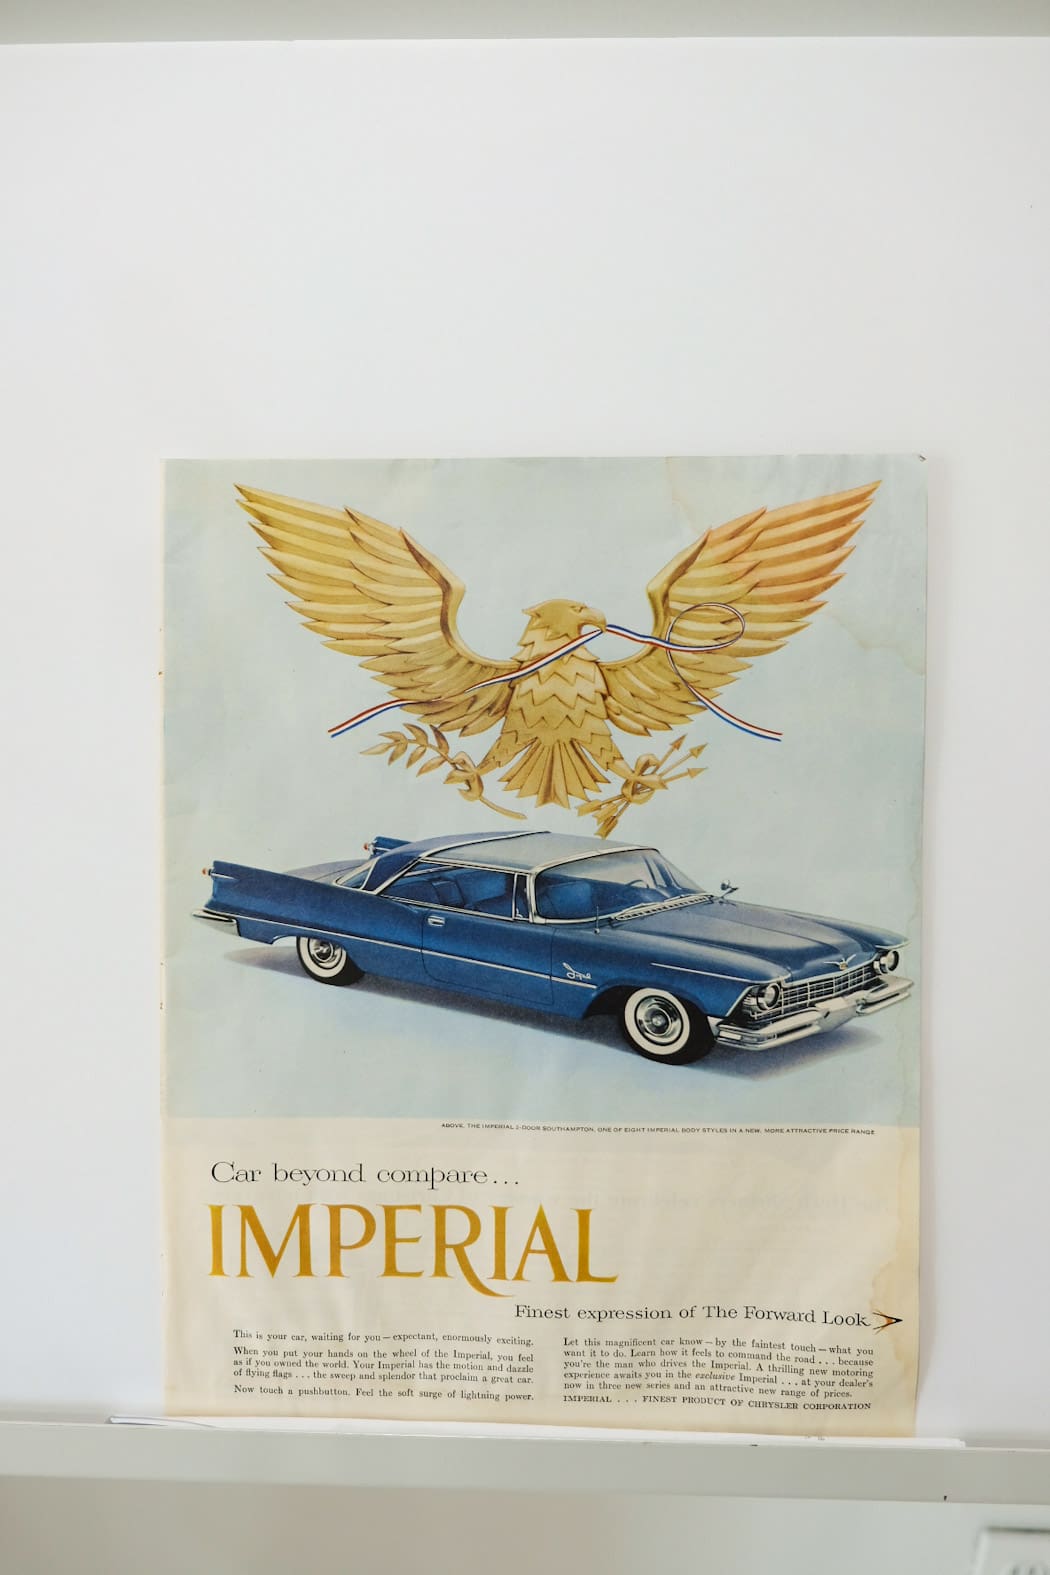 The Imperial 2-Door Southampton Print Ad